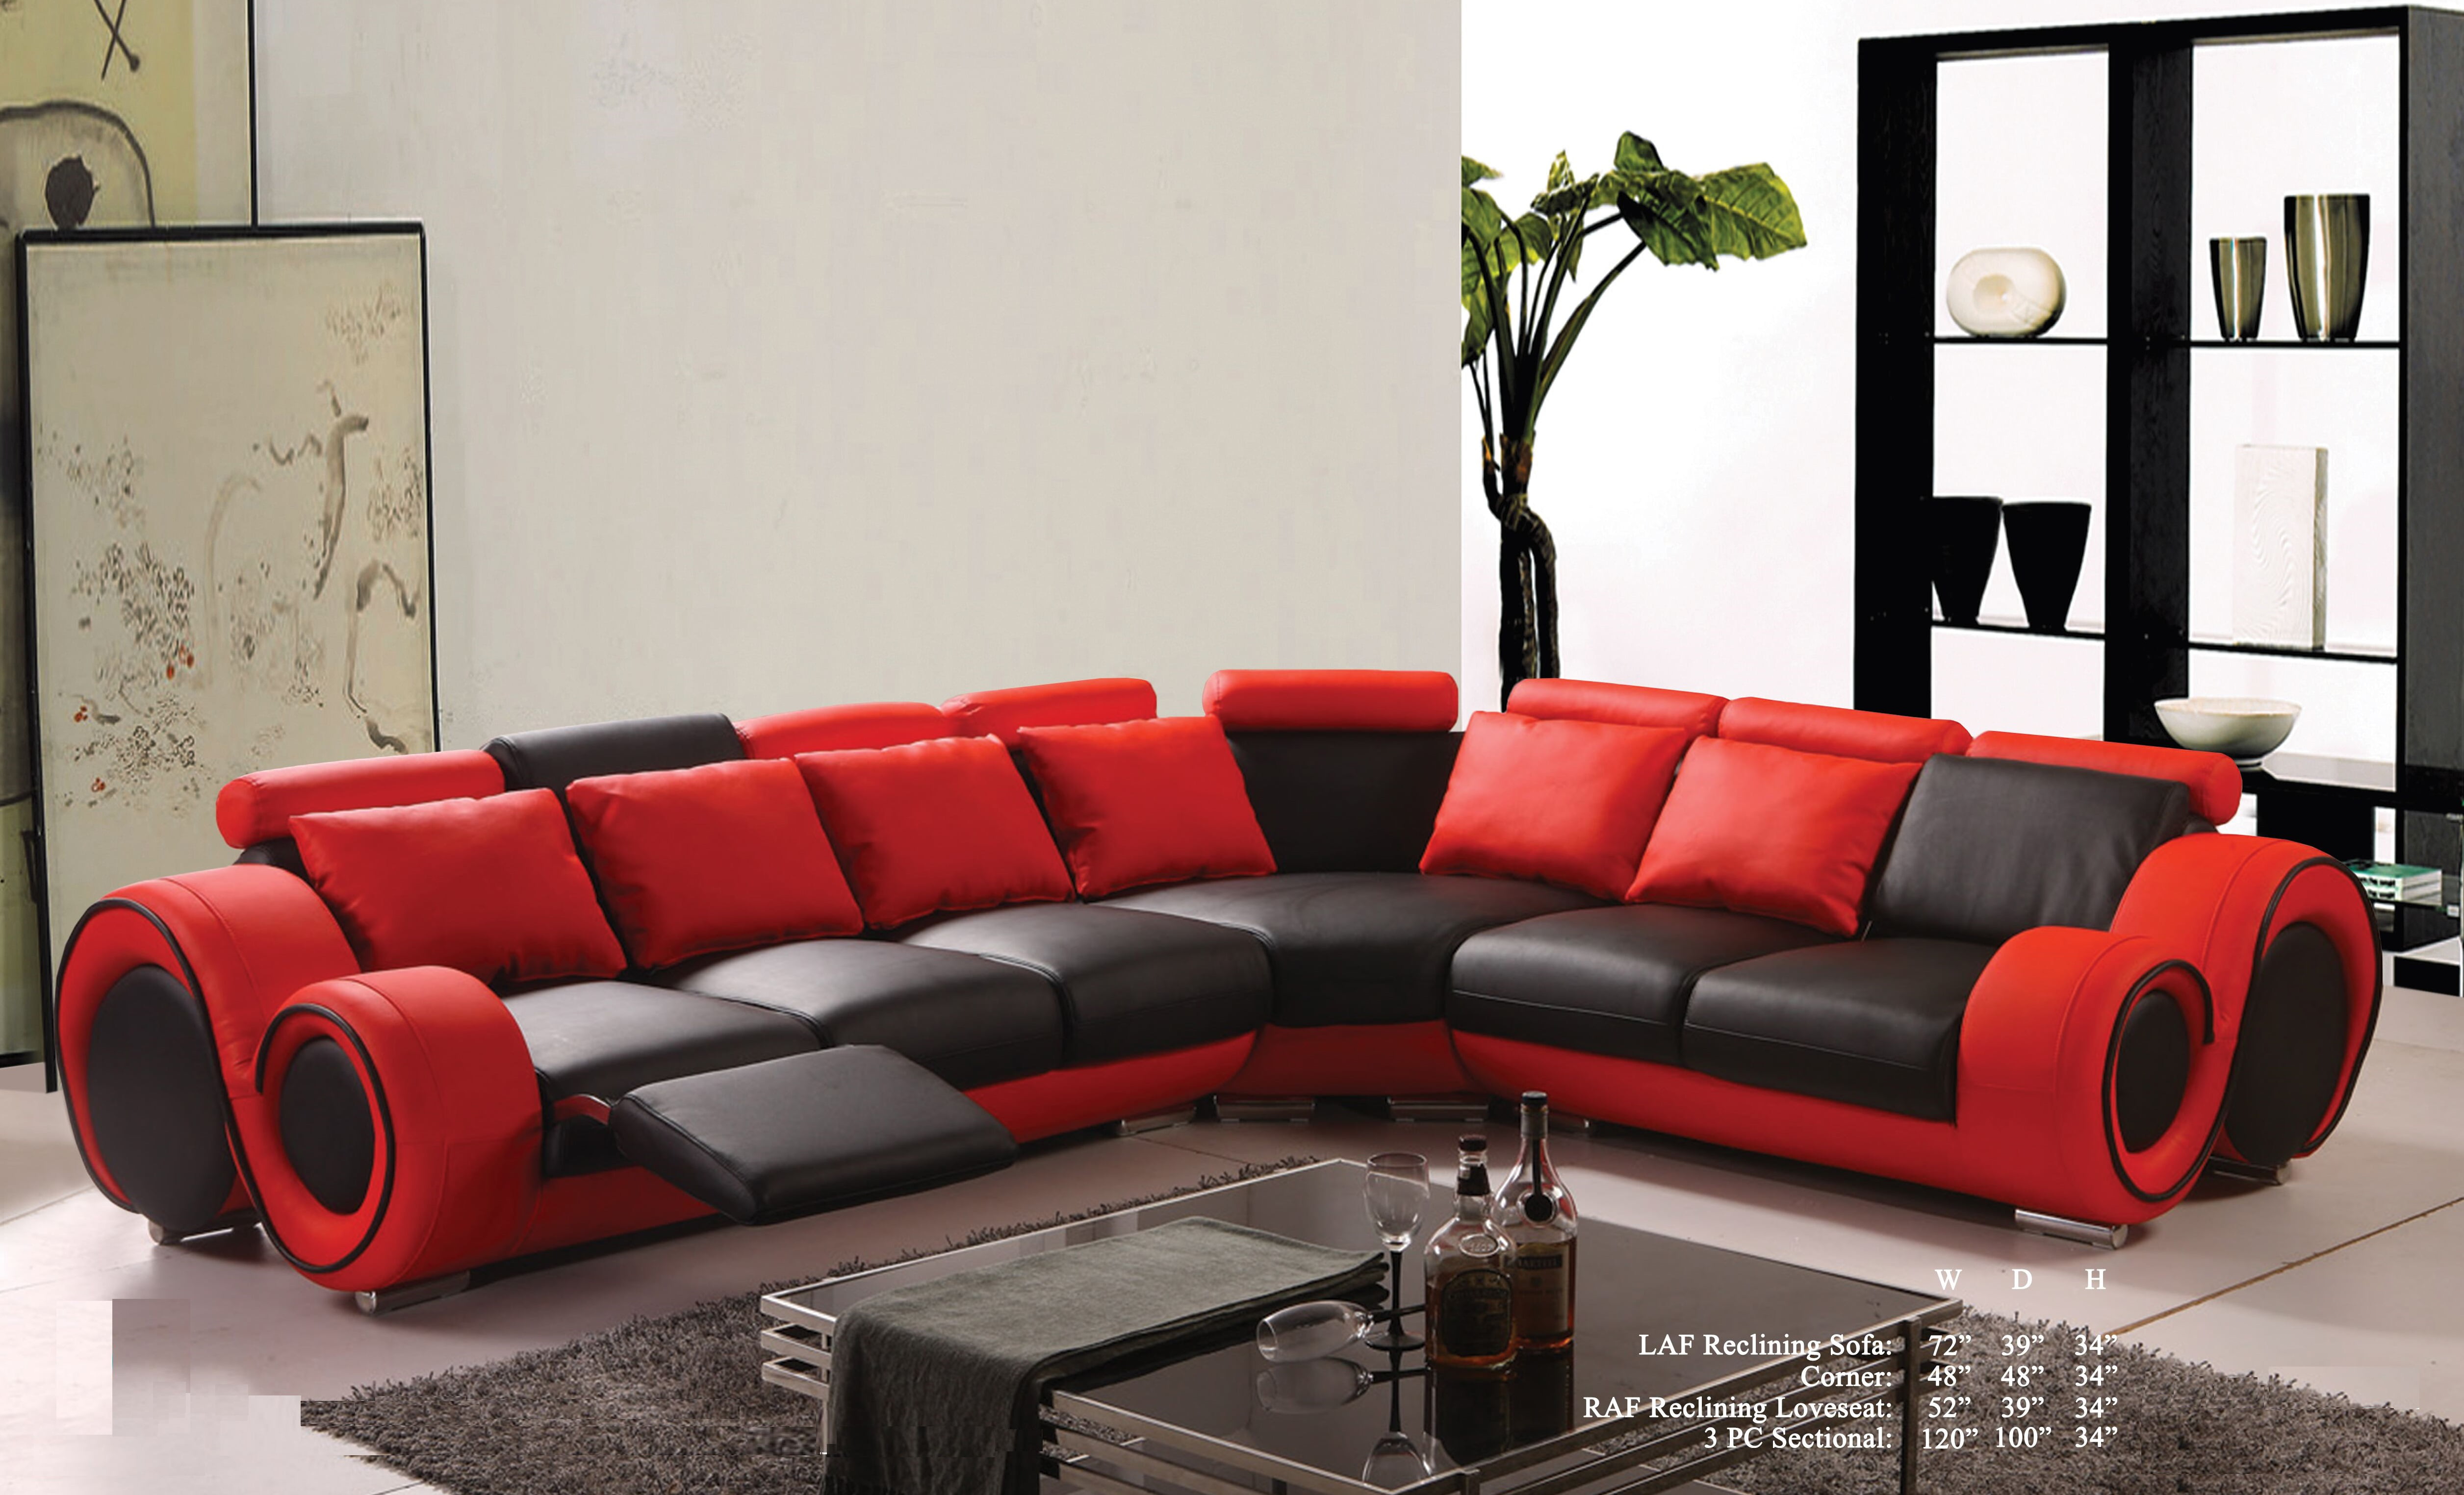 Black Bonded Leather Sectional Sofa Set, Black And Red Leather Sofa